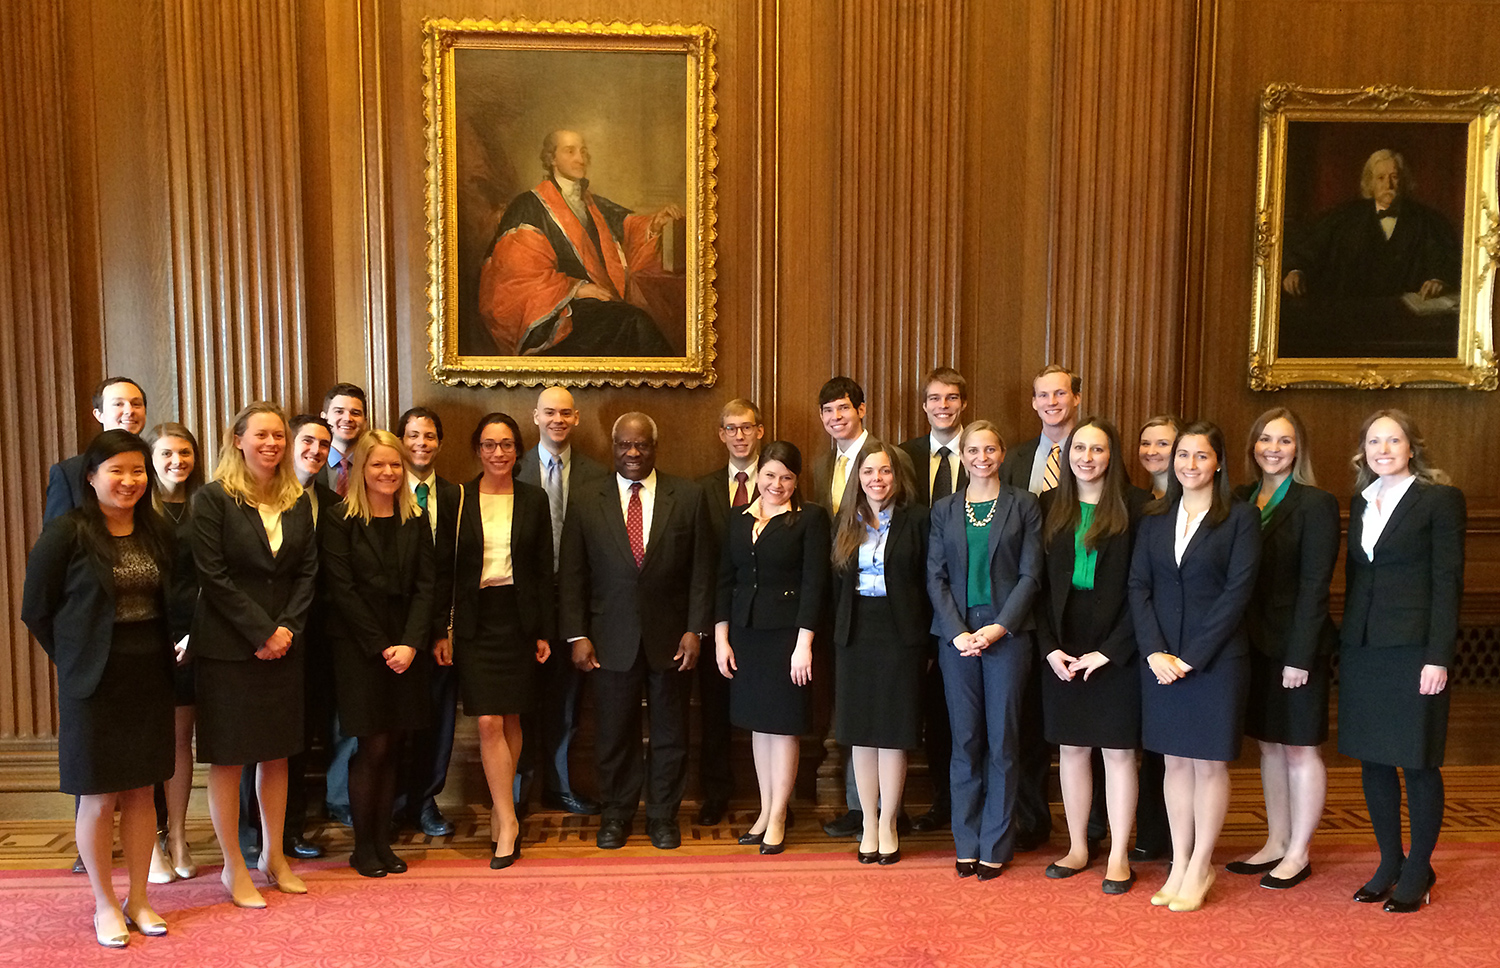 Group photo with Justice Clarence Thomas